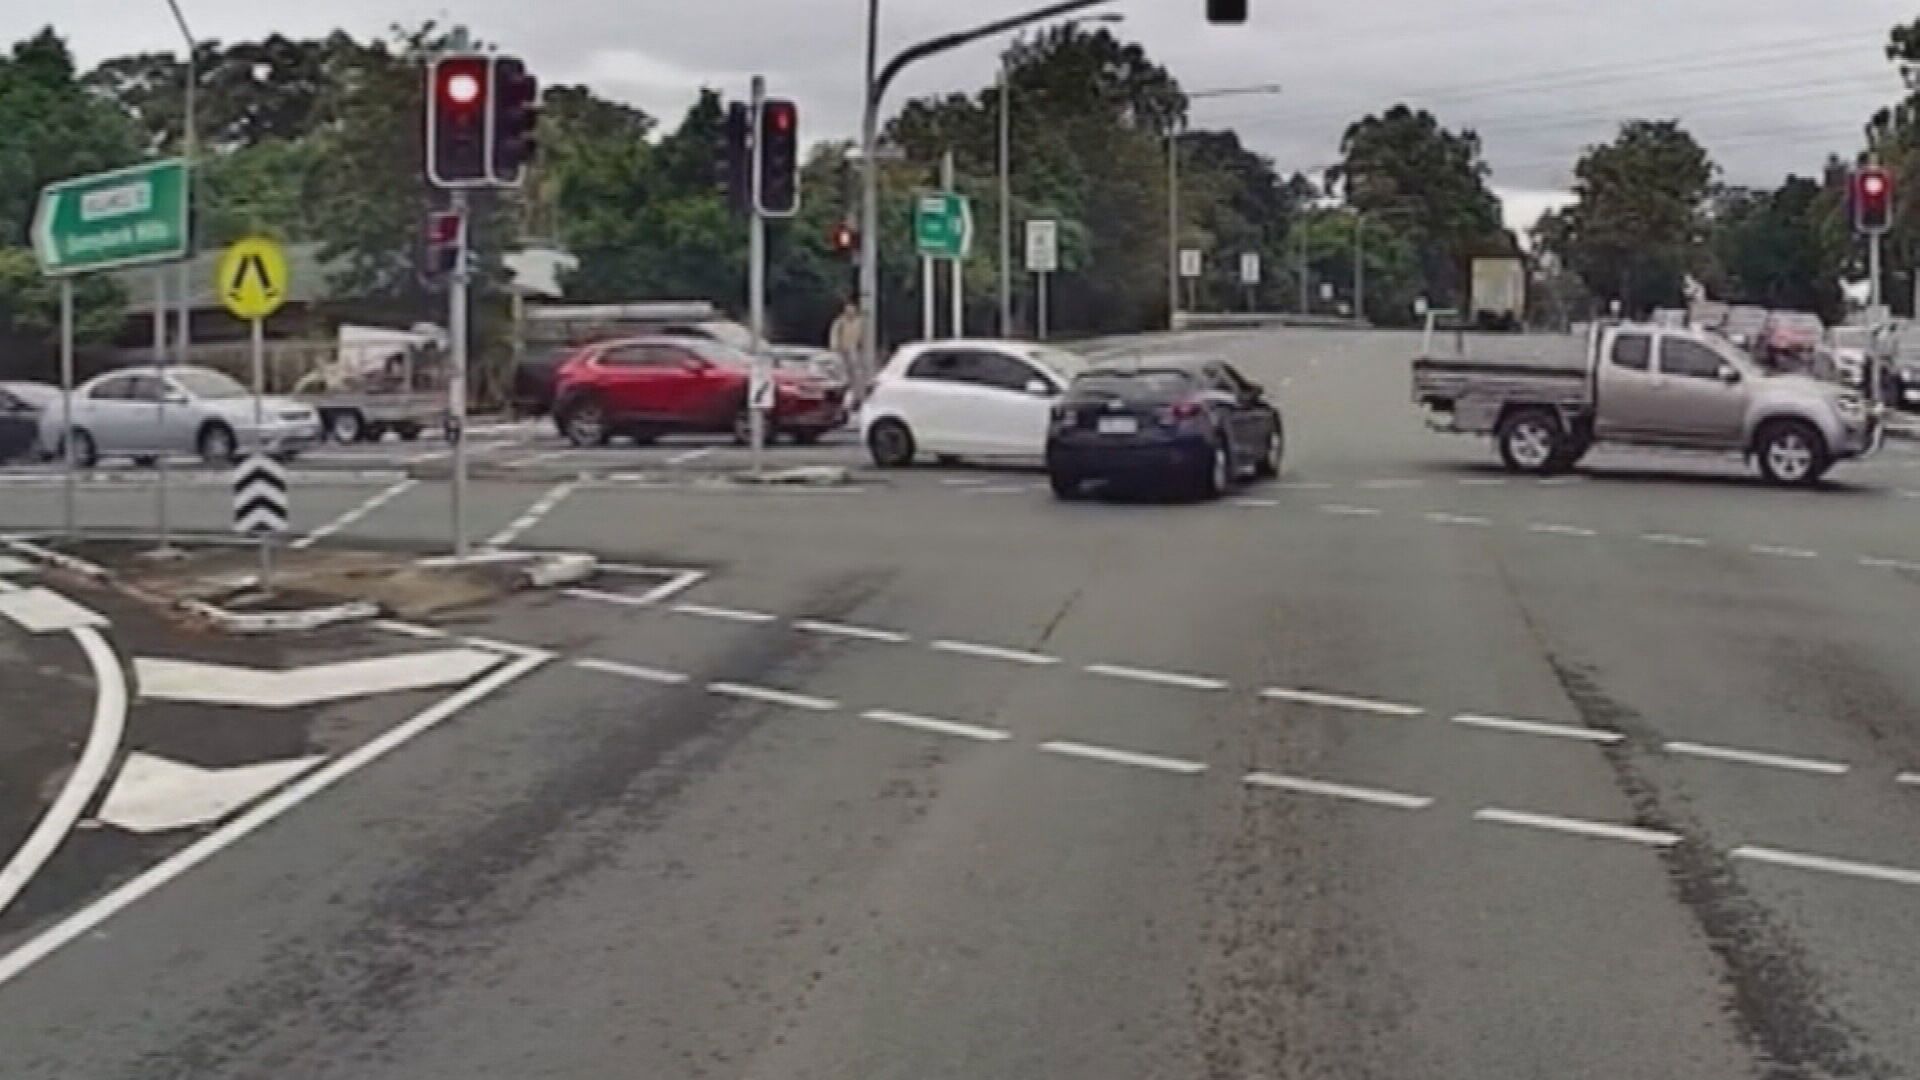 A man has been charged after a dramatic crash at a Brisbane intersection that was captured on dashcam.